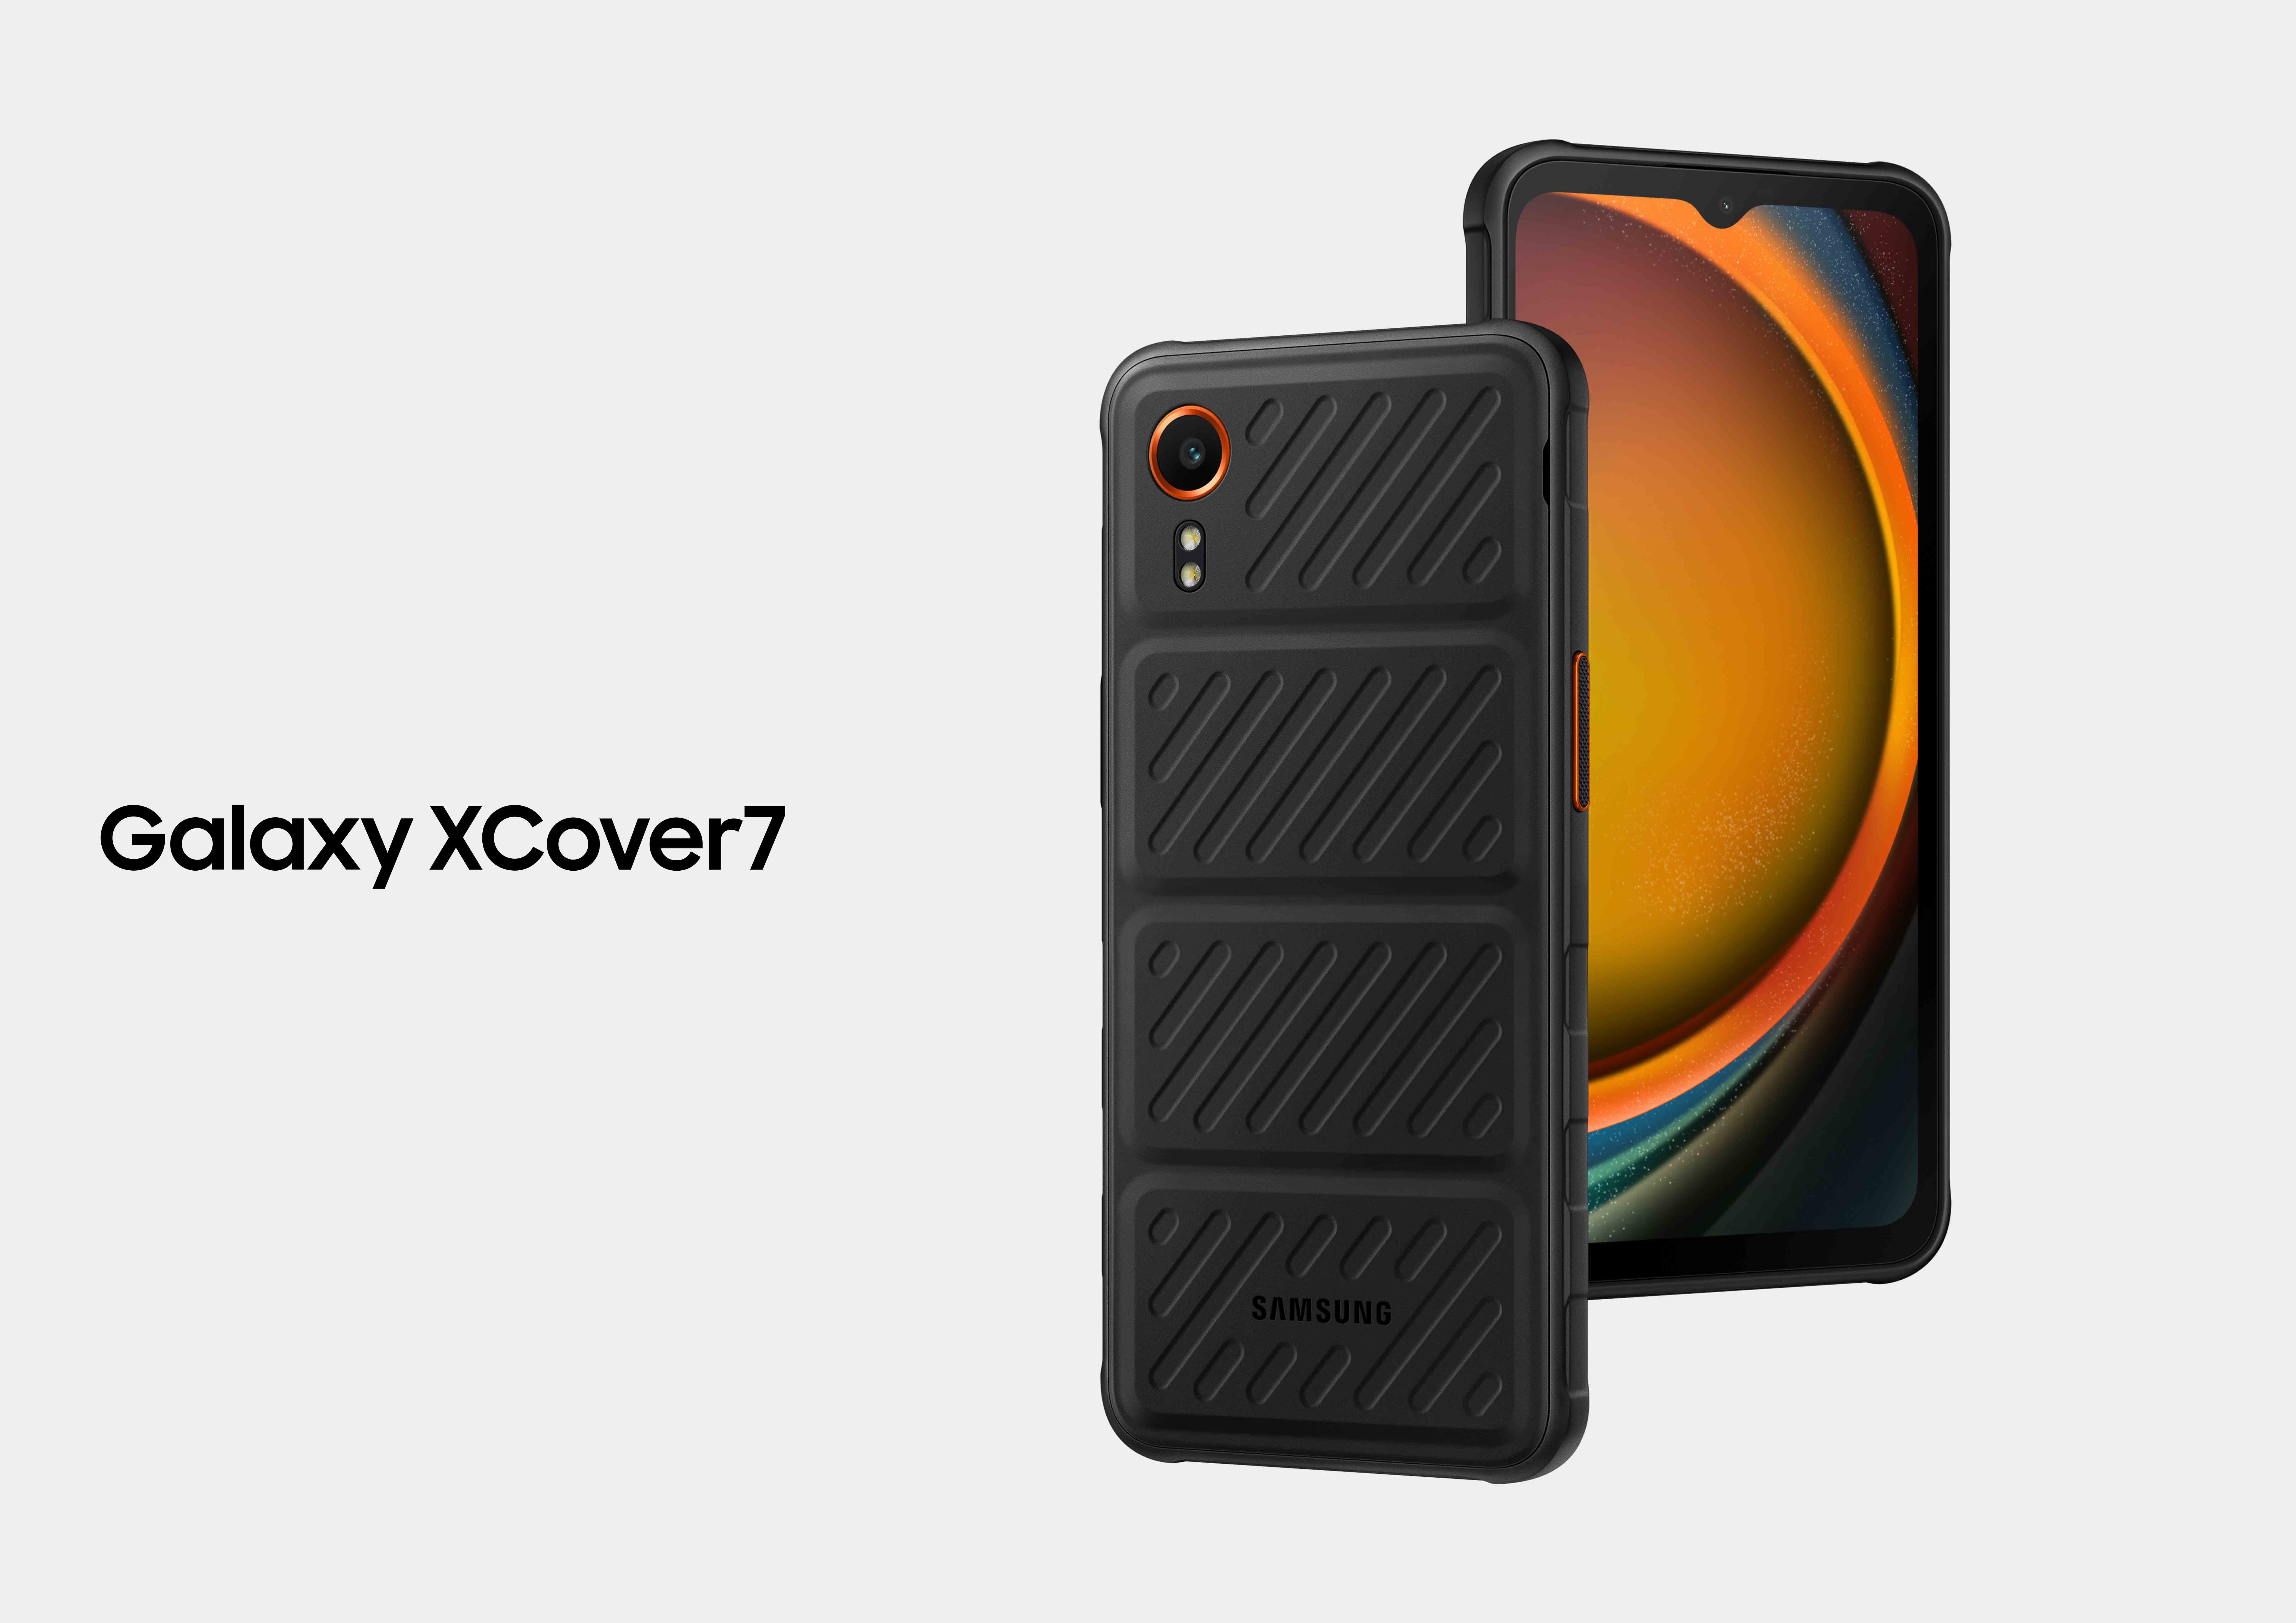 Samsung’s new rugged Galaxy XCover 7 phone is official